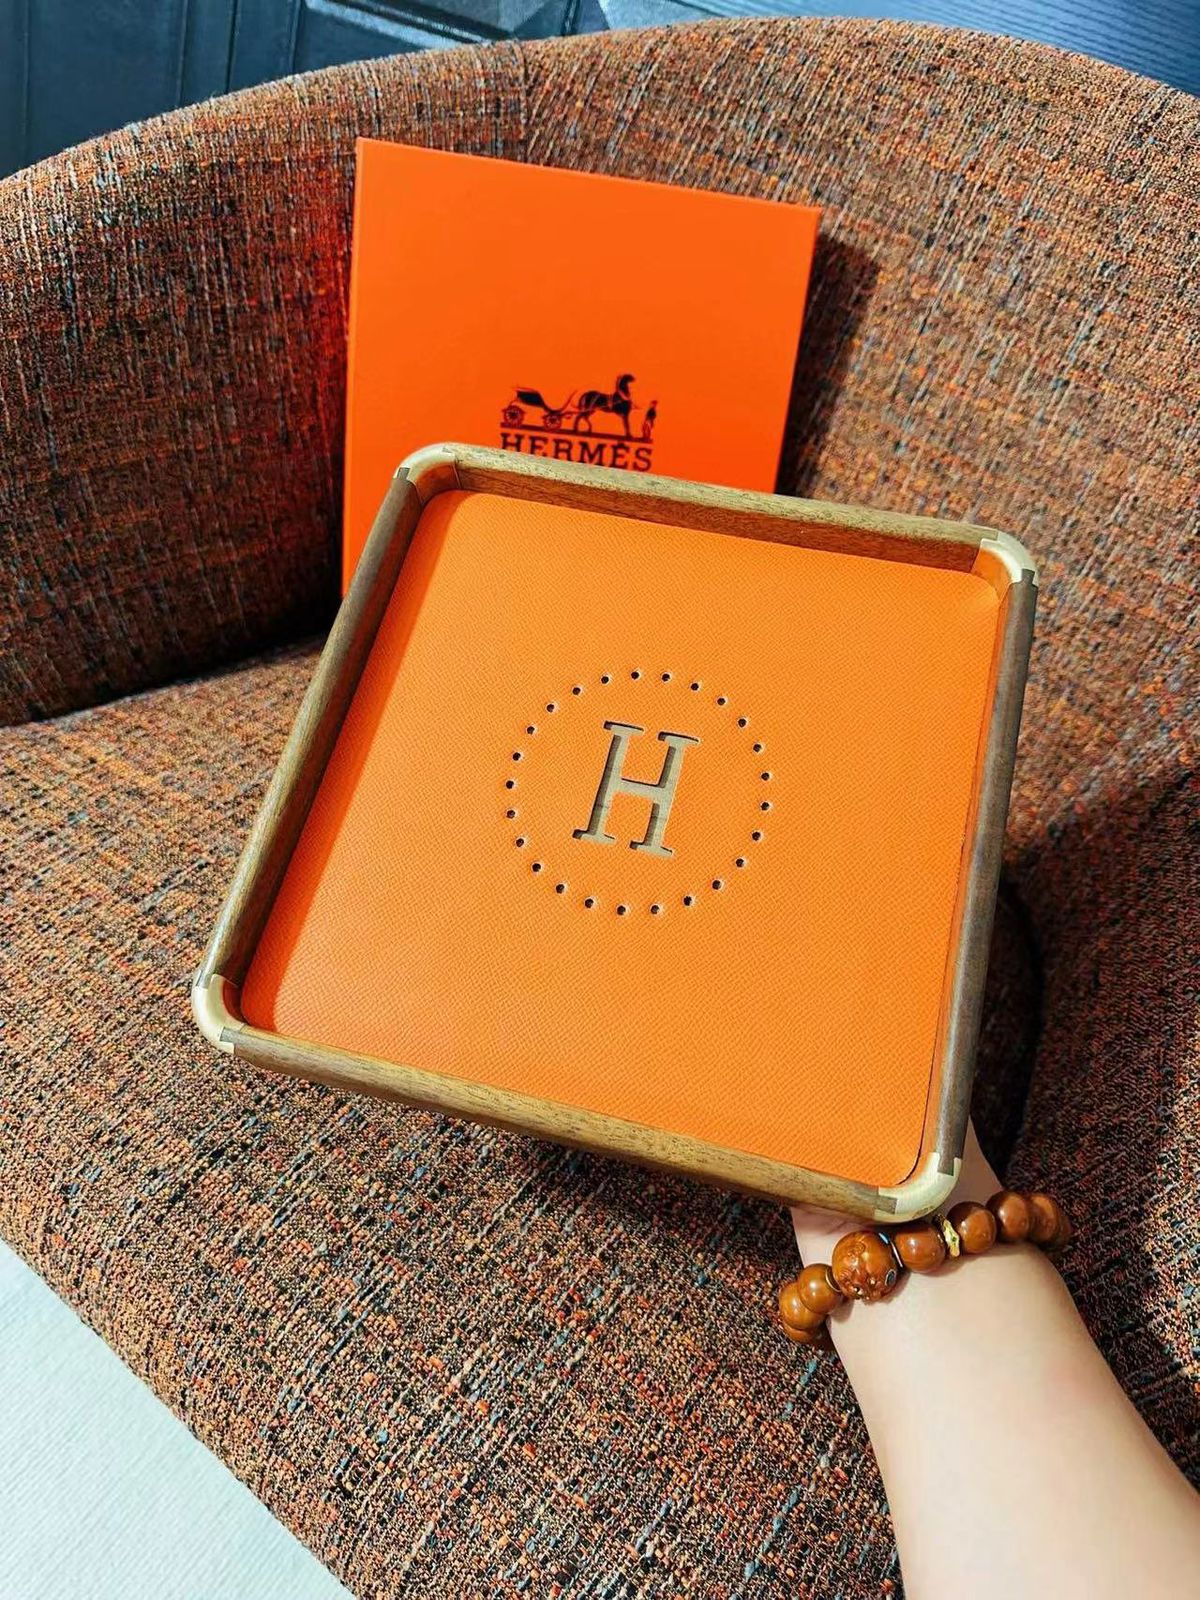 Hermes small square tray